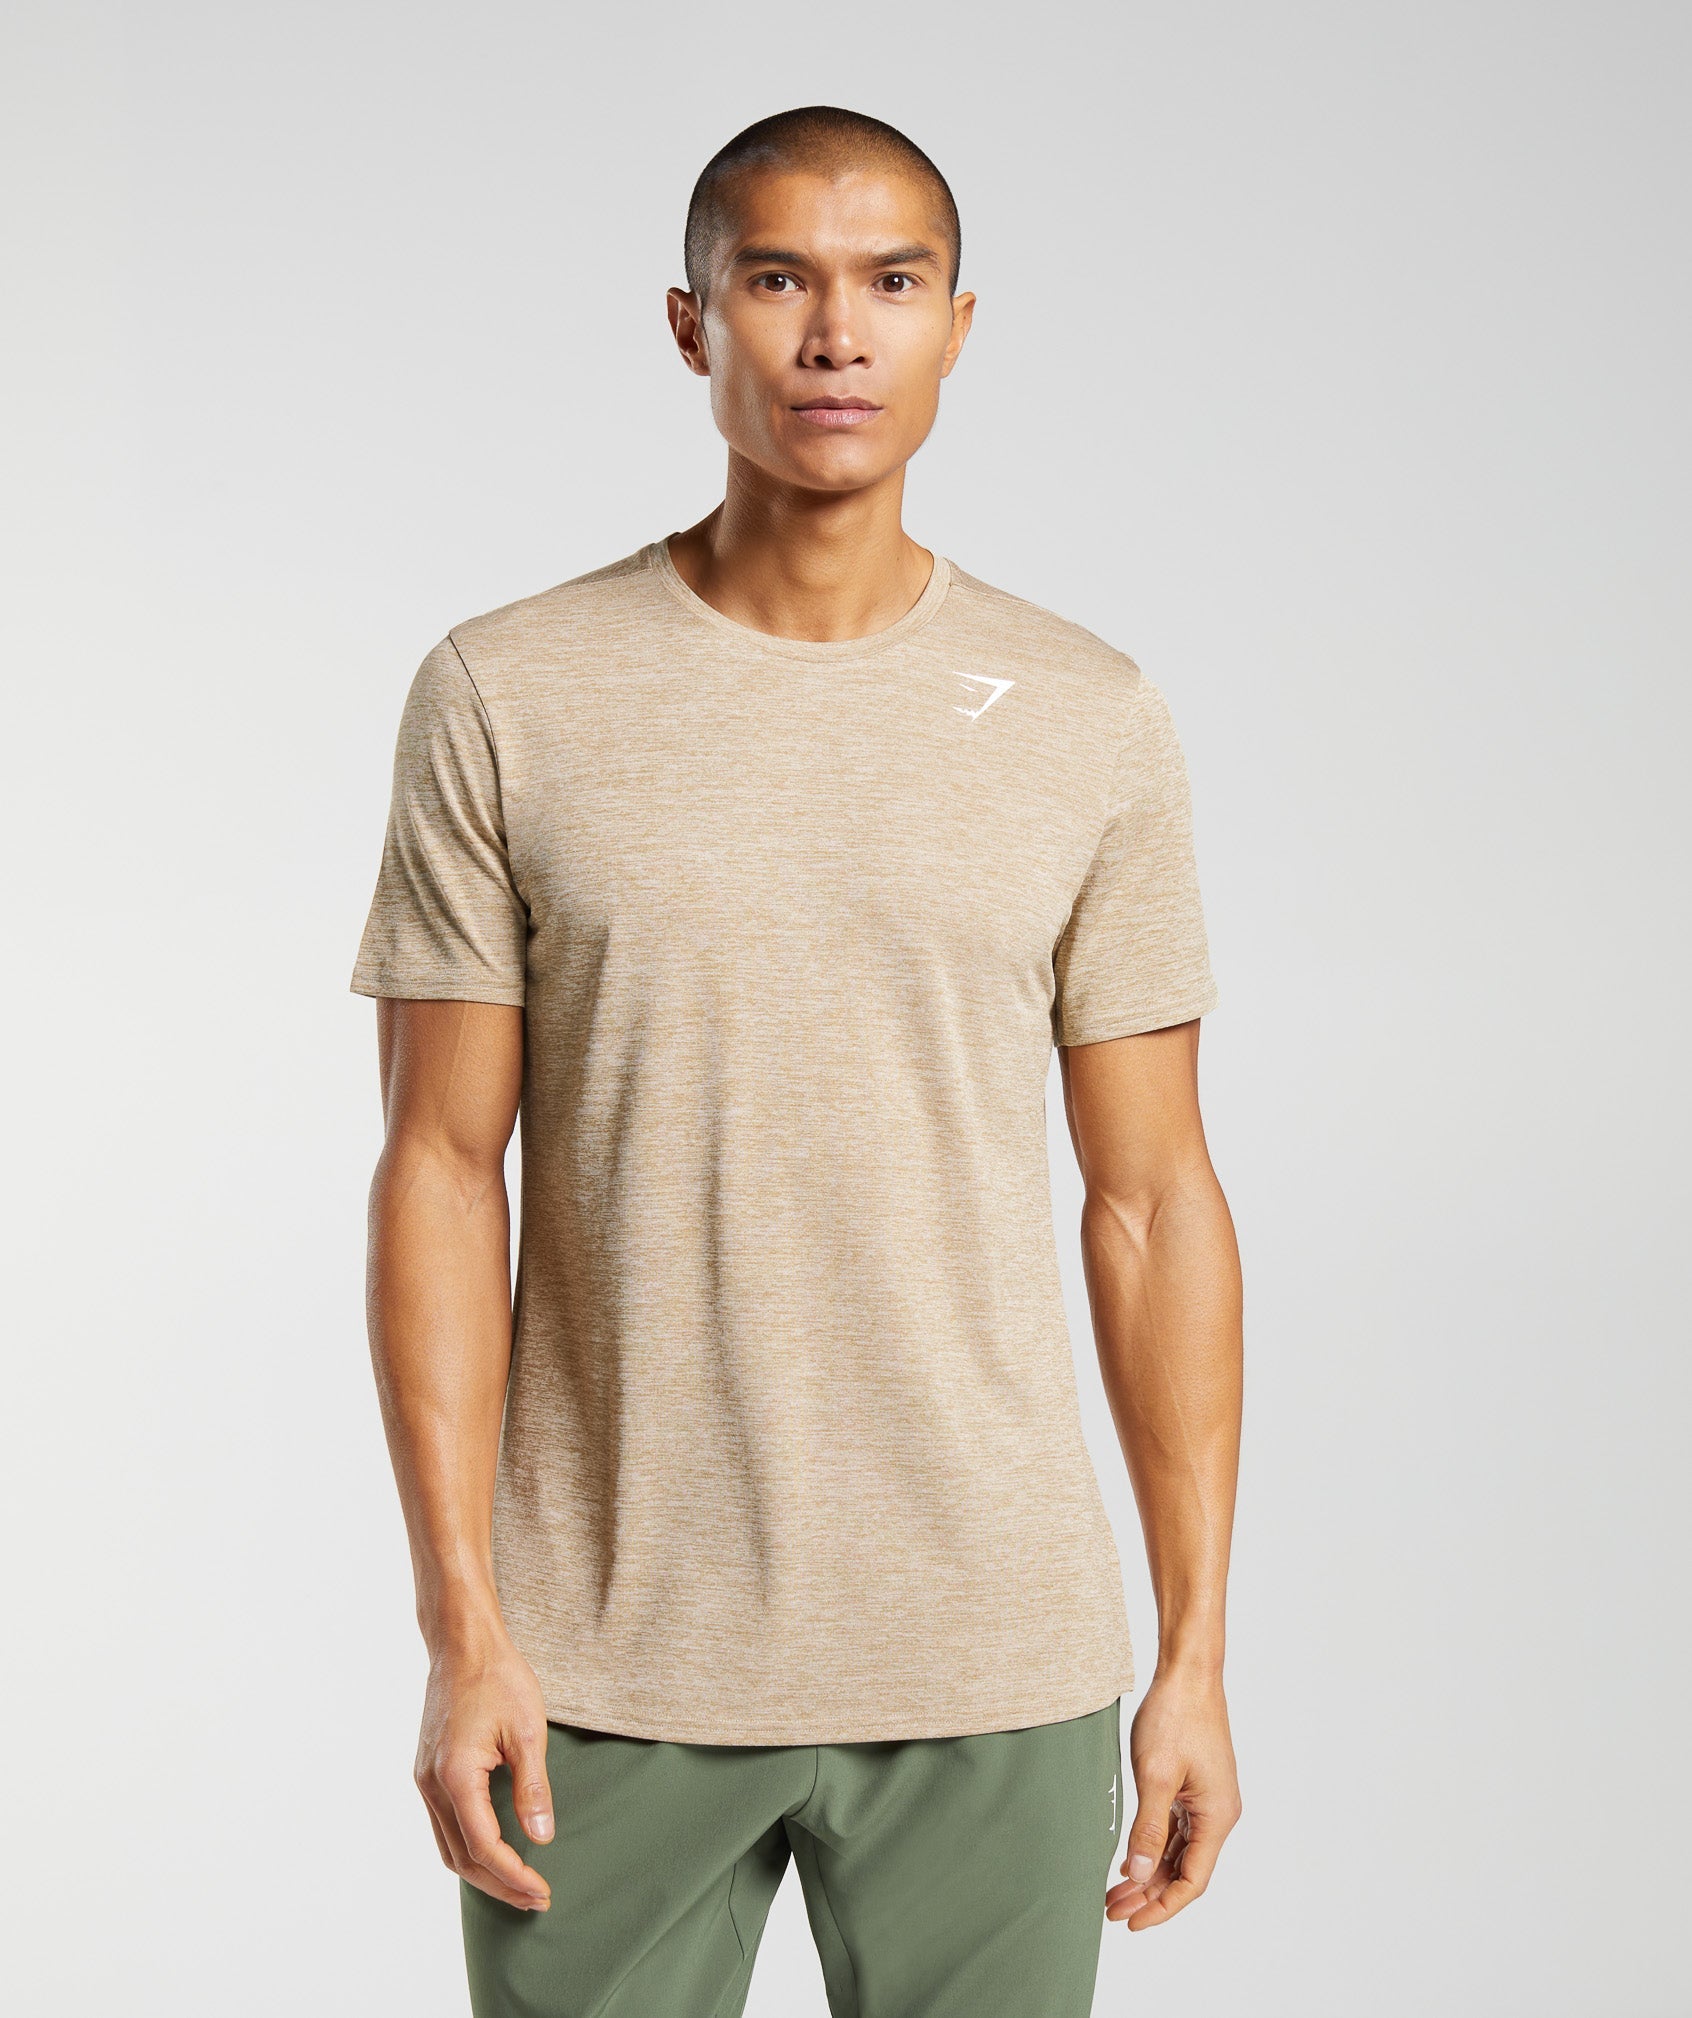 Arrival Marl T-Shirt in Toasted Brown/Camel Brown Marl - view 1